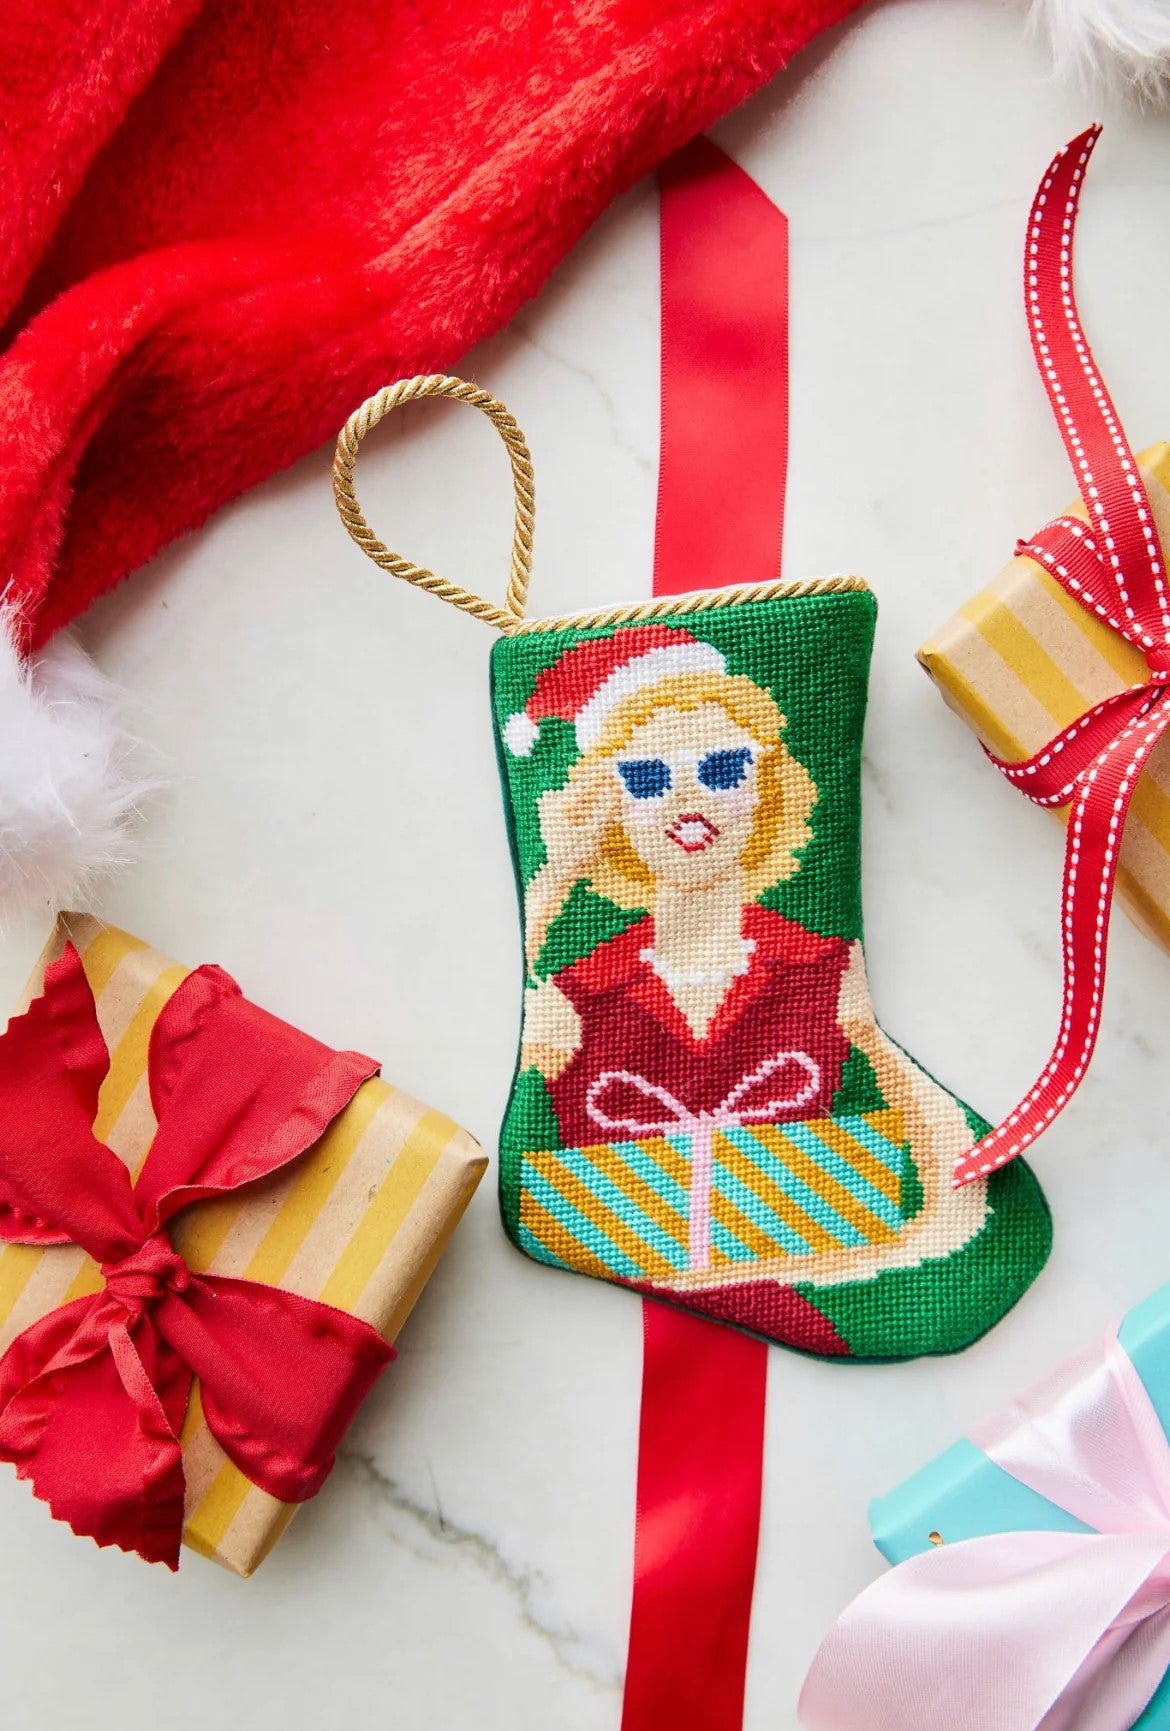 Mini Needlepoint Stocking - Mrs. Claus Never Looked So Good